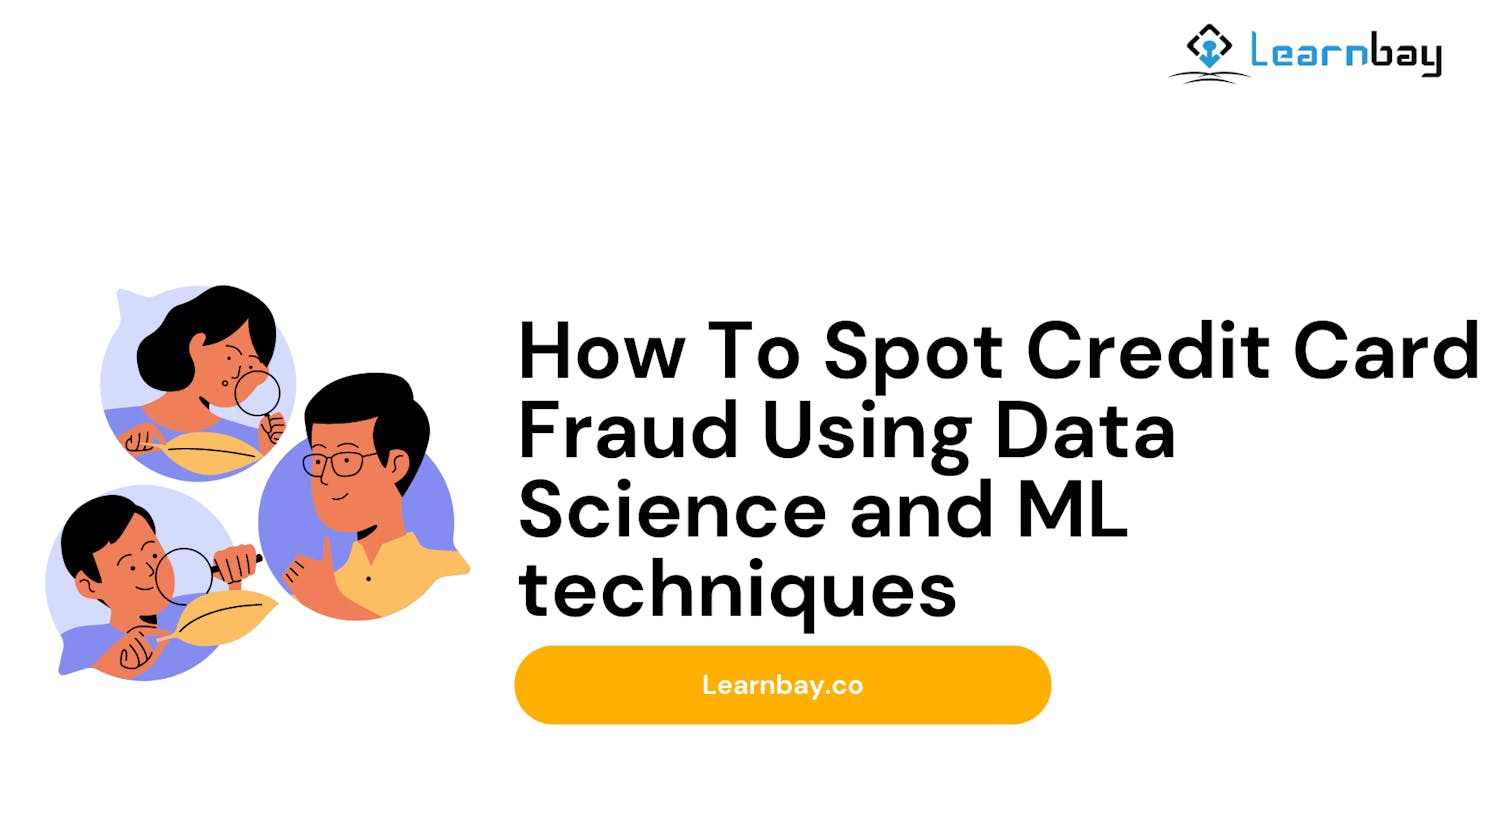 How To Spot Credit Card Fraud Using Data Science and ML techniques